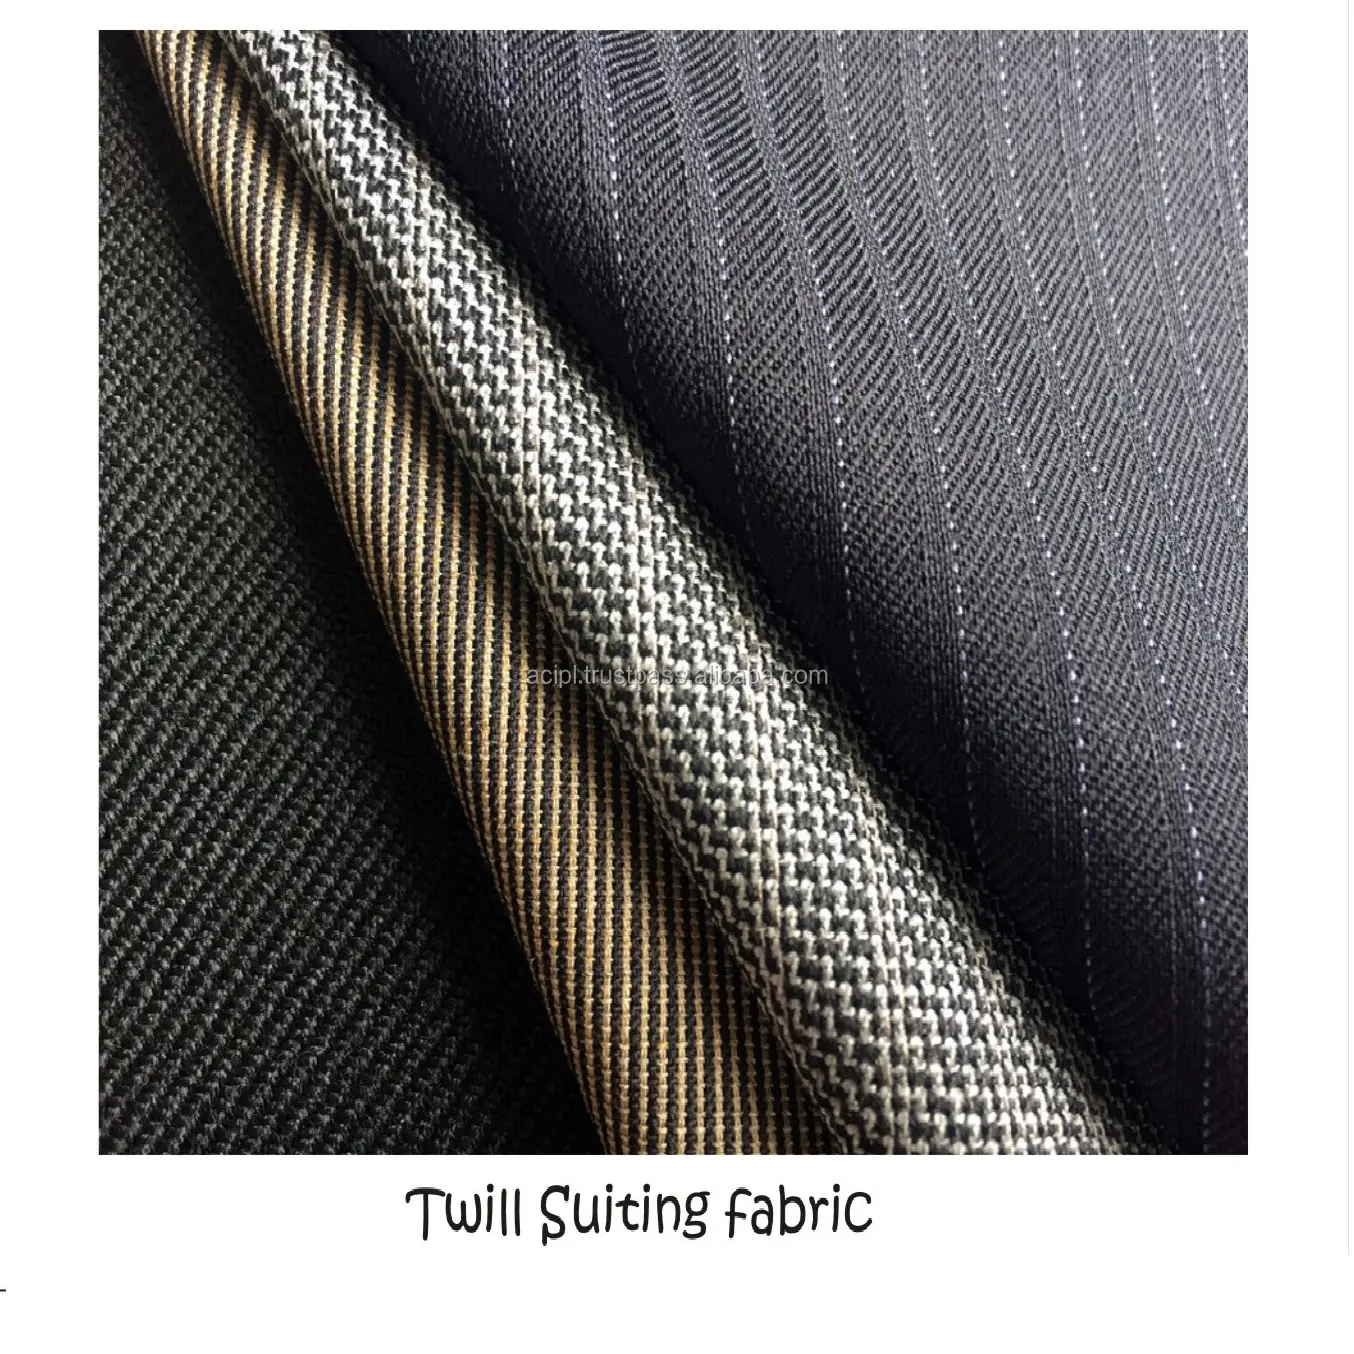 High Quality Interlining Fabric that is woven, providing strength and stability with a heavier weight for increased support.